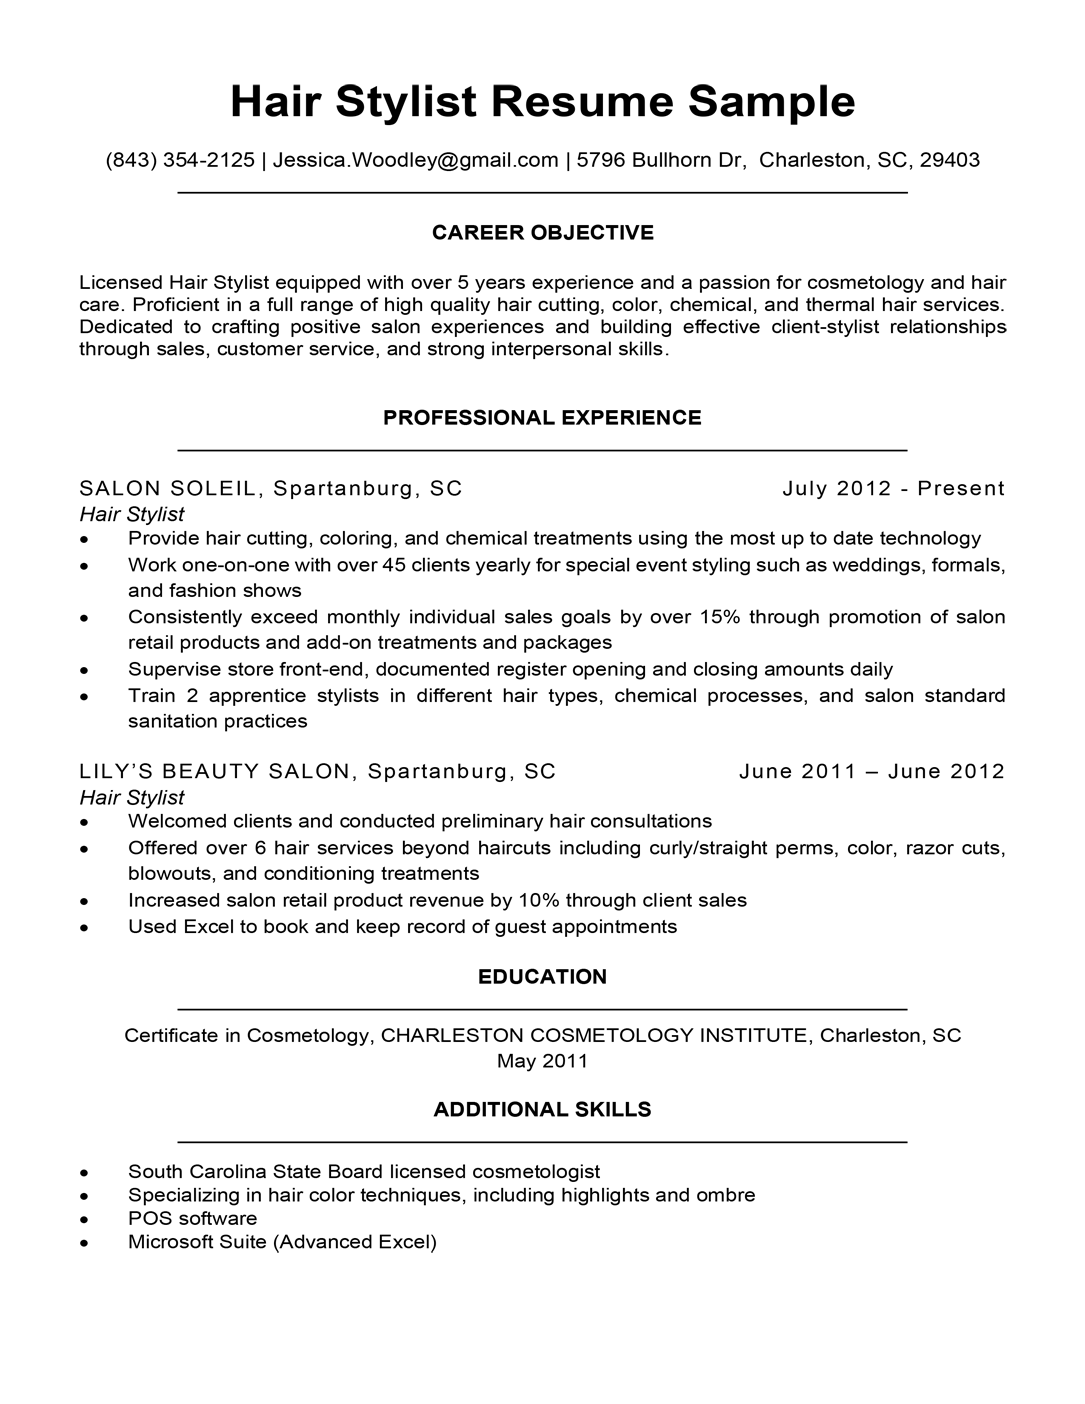 Cover Letter Examples For Hairstylist from resumecompanion.com